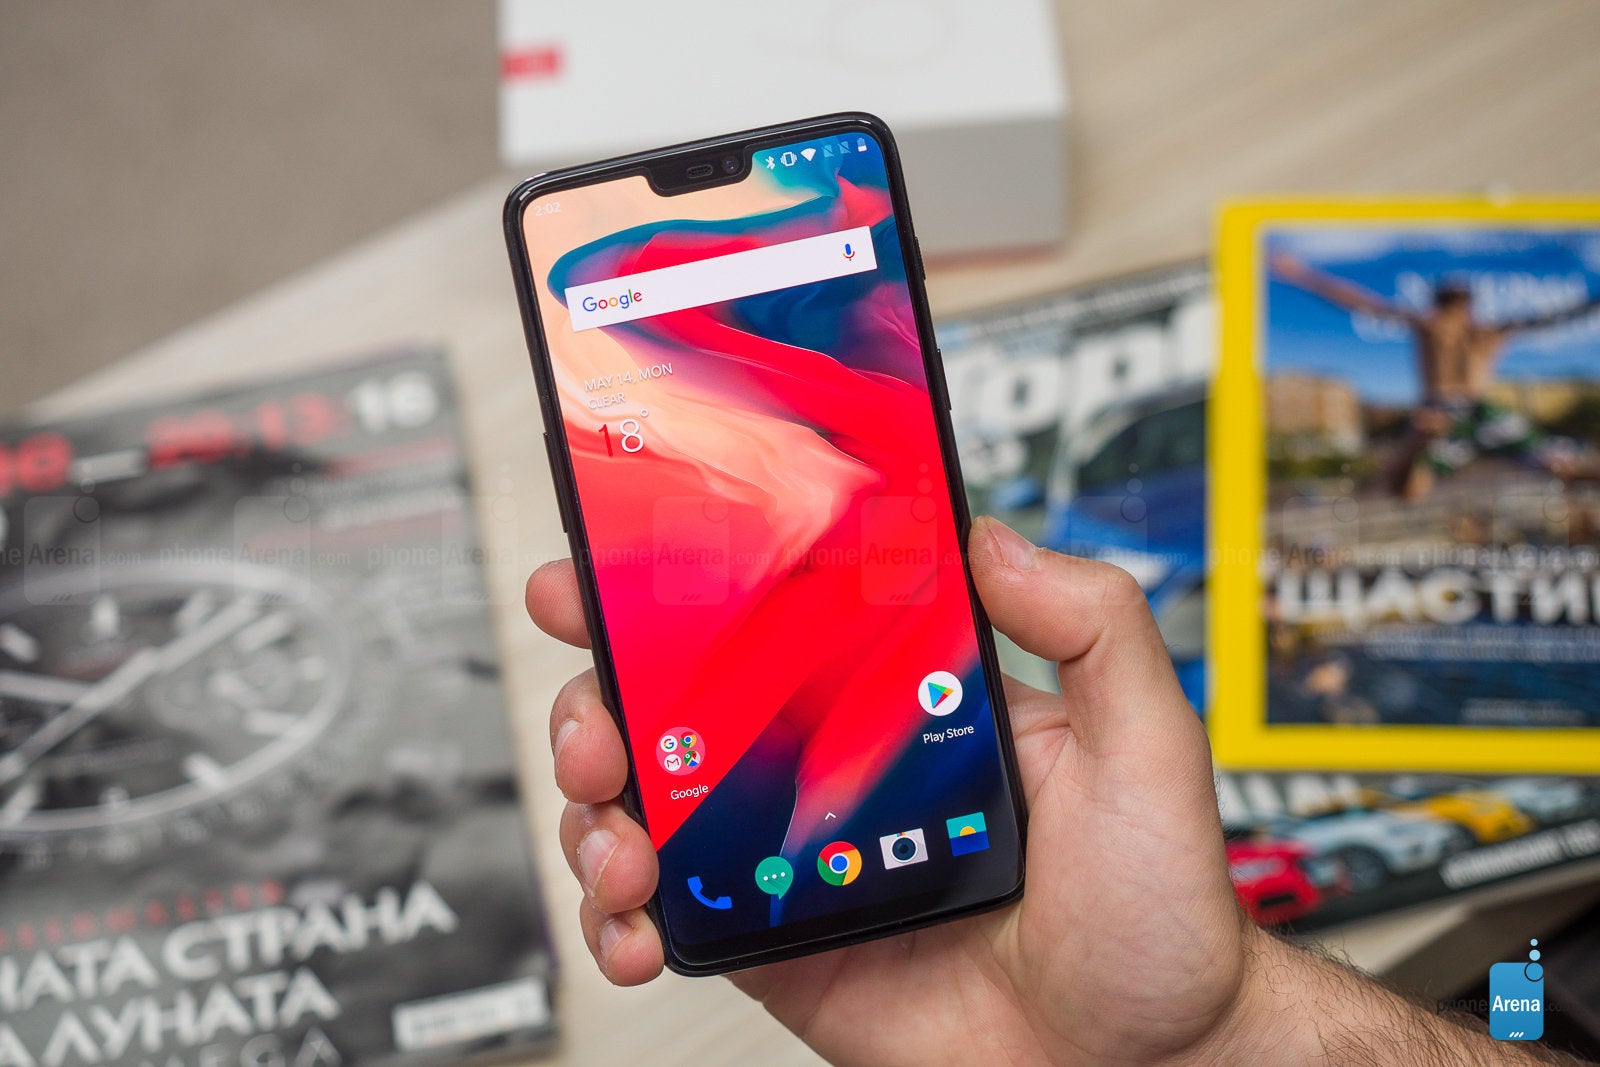 The OnePLus 6 is one of the few notable flagship caliber smartphones that stays under the $600 starting price, which is a huge savings over its main rivals. - Why my next phone won’t be a new flagship